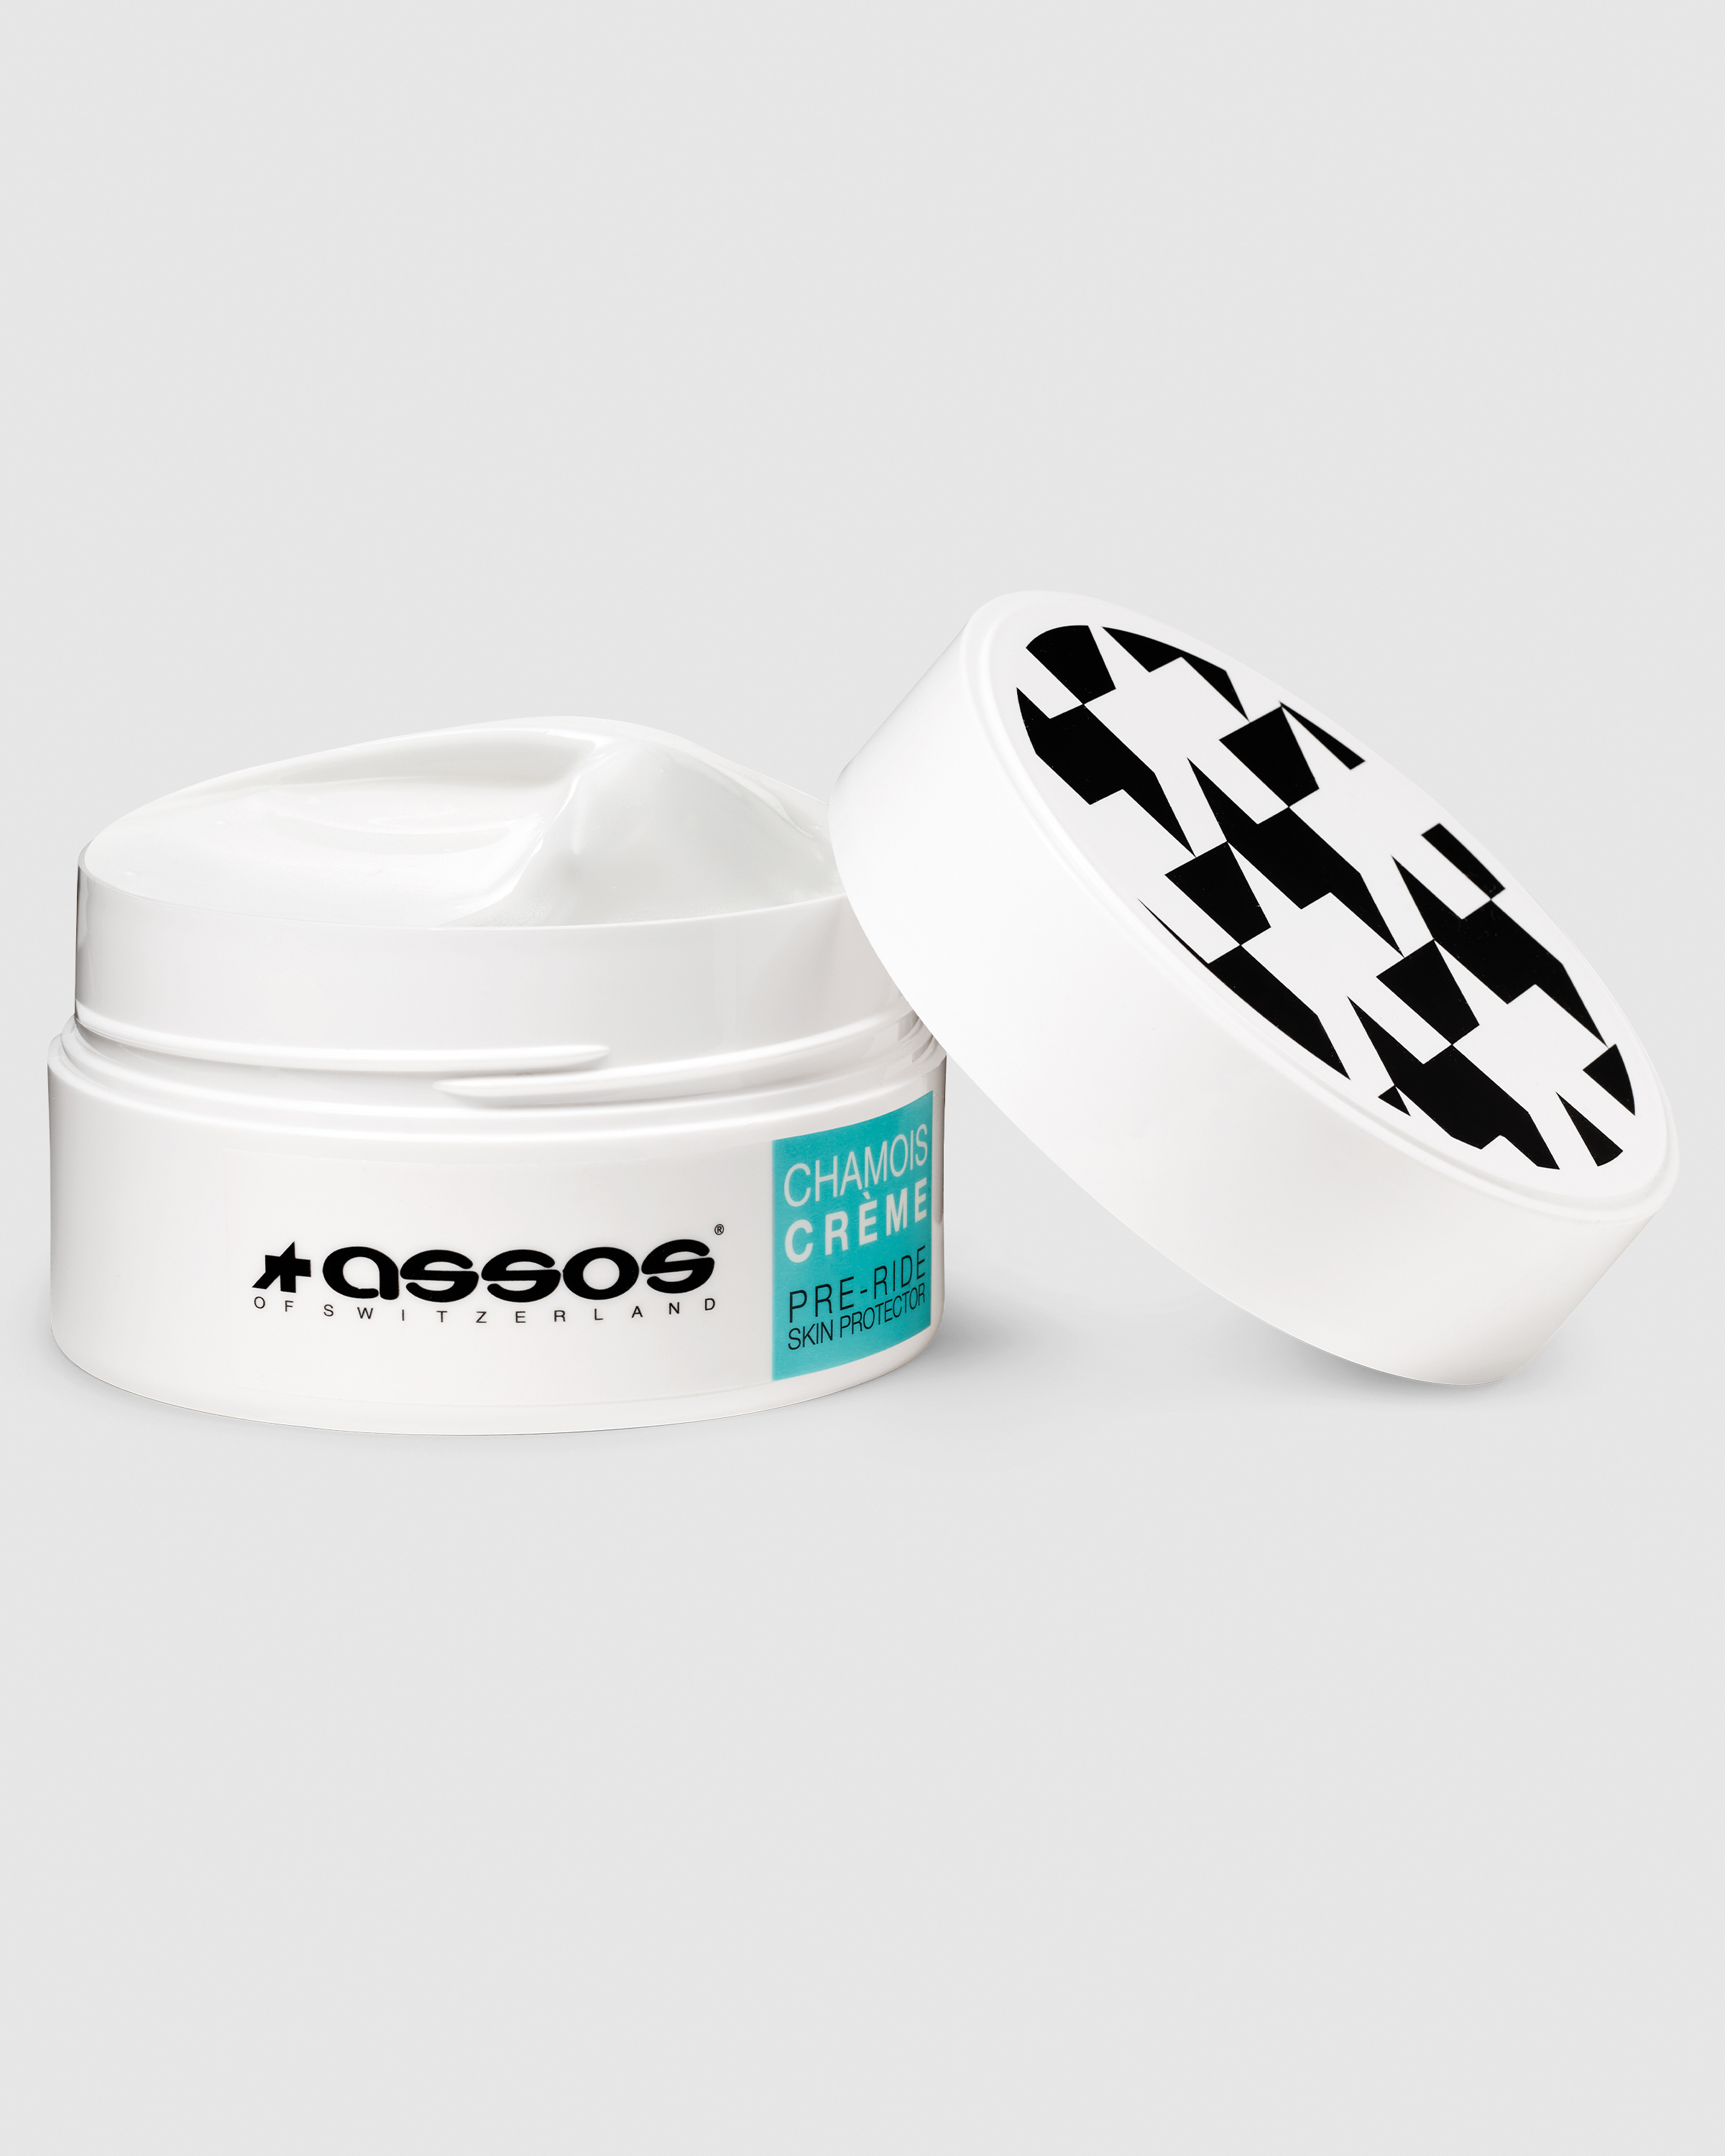 Chamois Crème 200ml - ASSOS Of Switzerland - Official Outlet